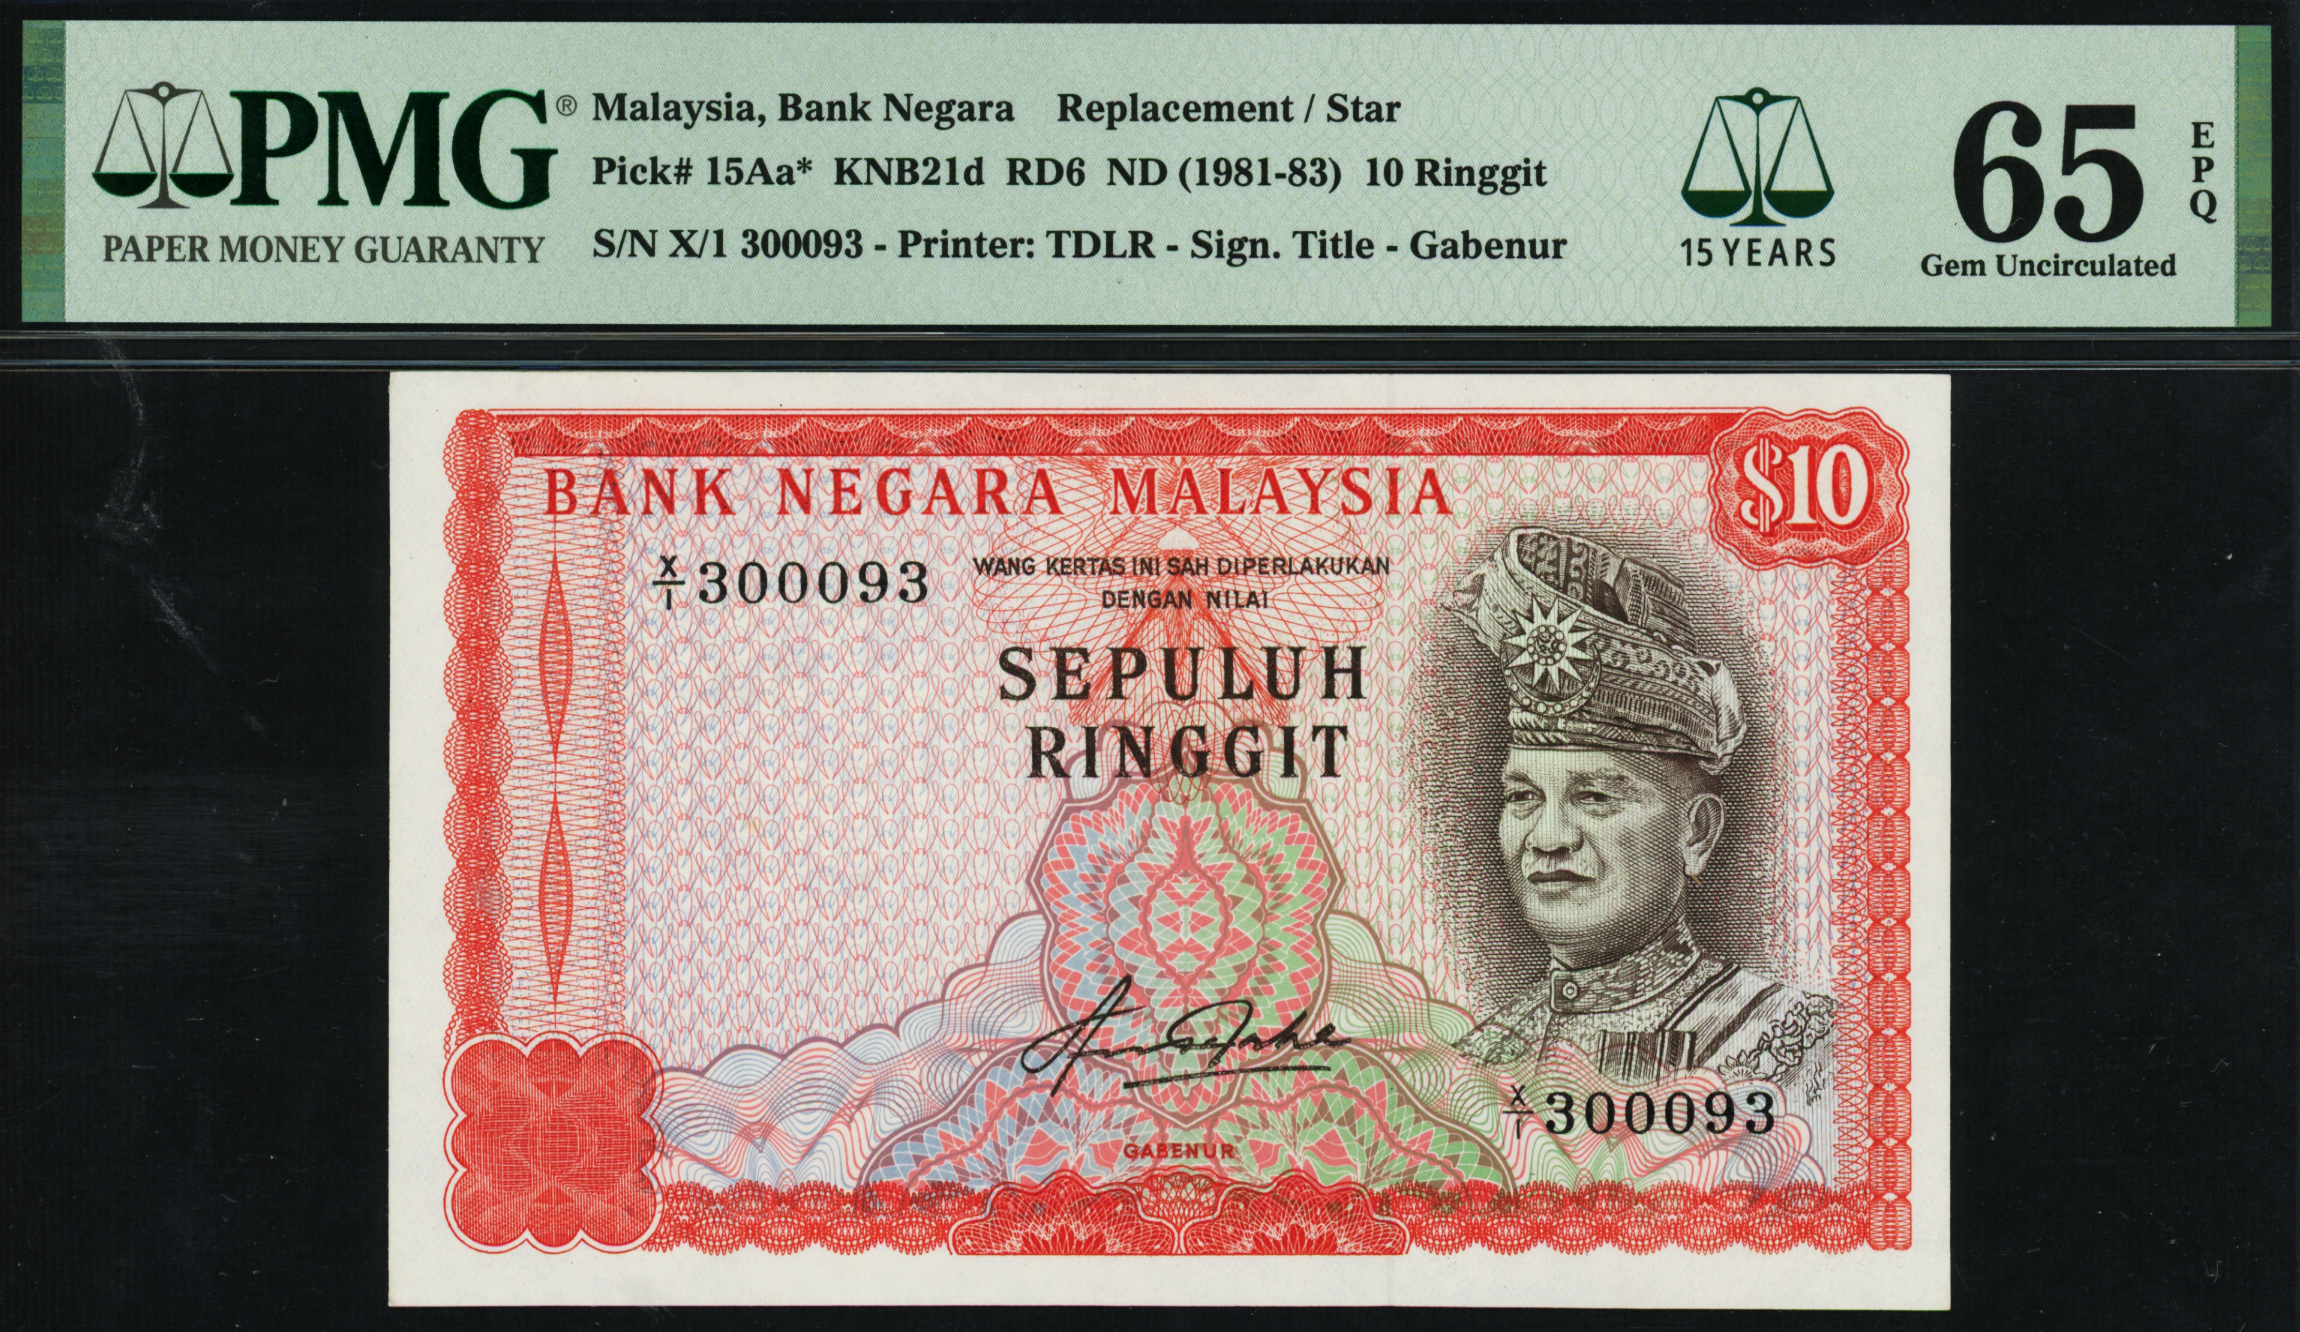 Malaysia 4th 1981-1983 RM10 Replacement Note X/1 300093 PMG